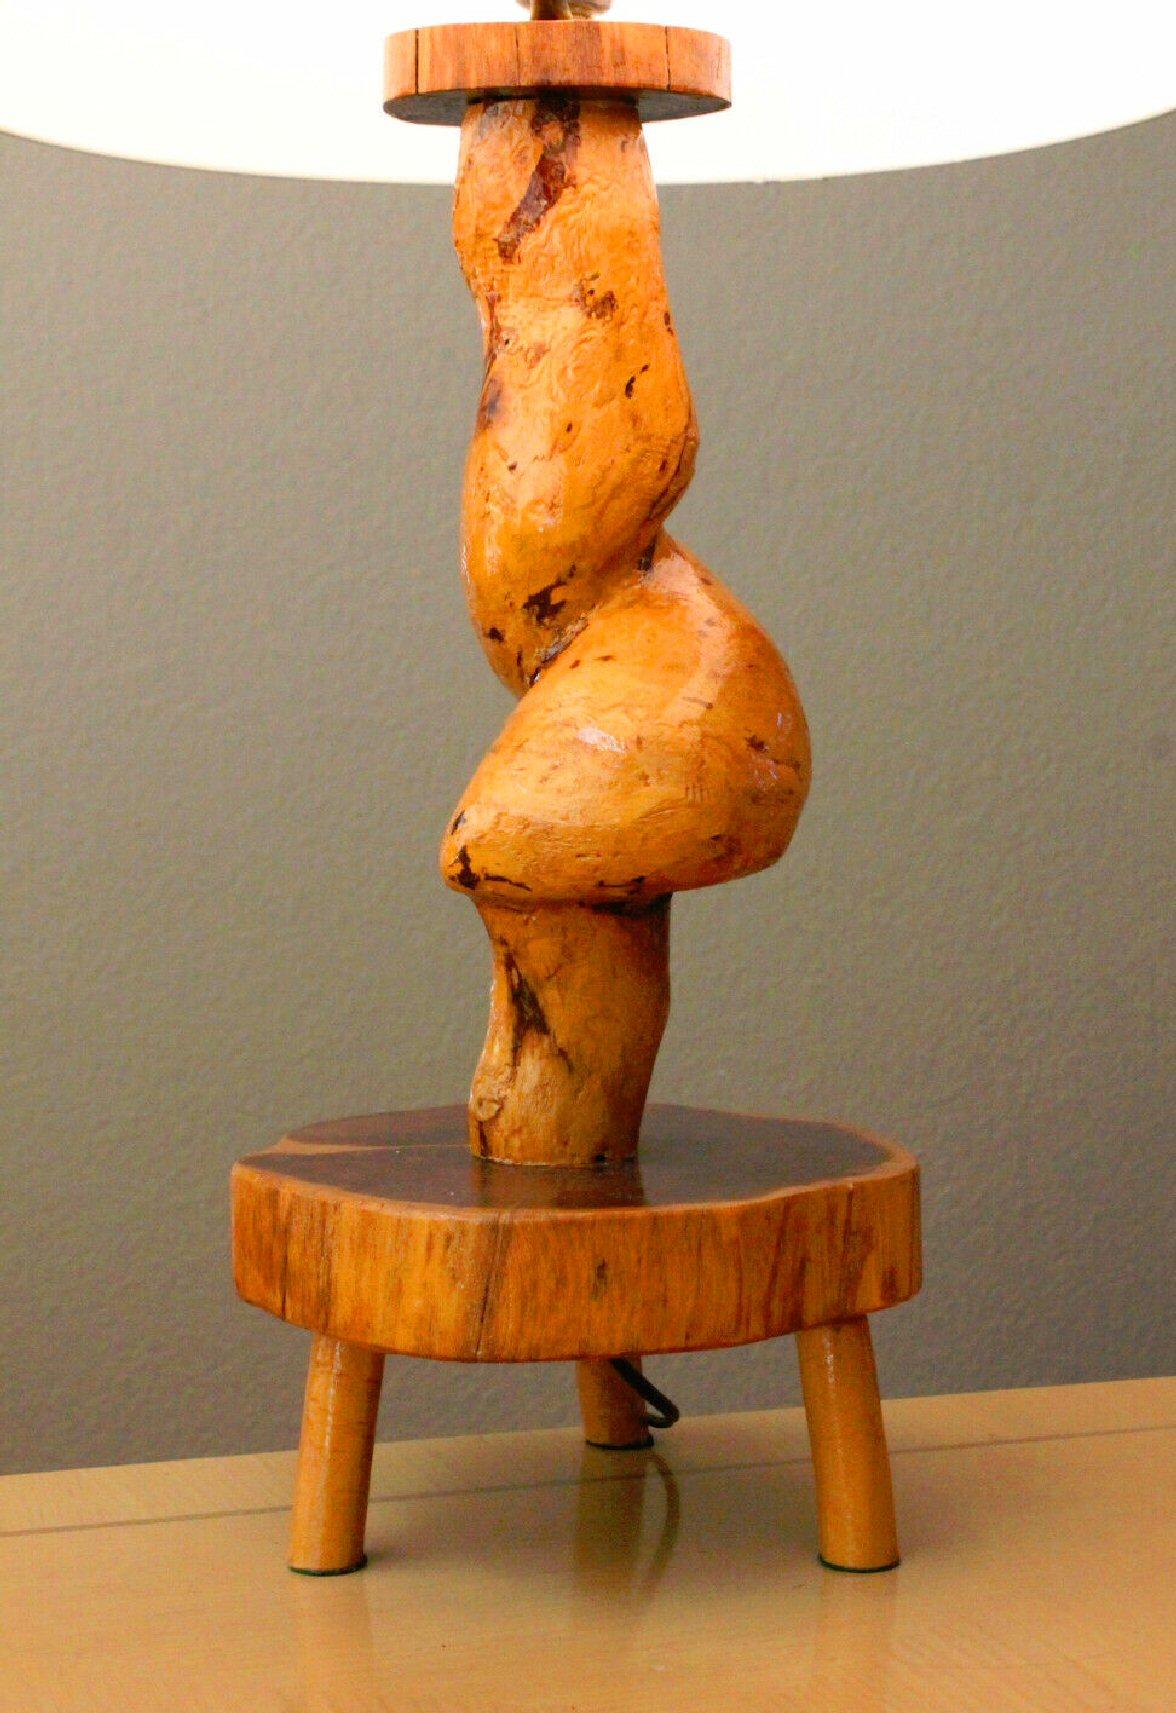 Exceptional!

MAPLE BURL
FREE FORM EDGE SLAB
MID CENTURY MODERN
TRIPOD TABLE LAMP!

Magnificent Wood and Finish!

After George Nakashima


Dimensions:  16